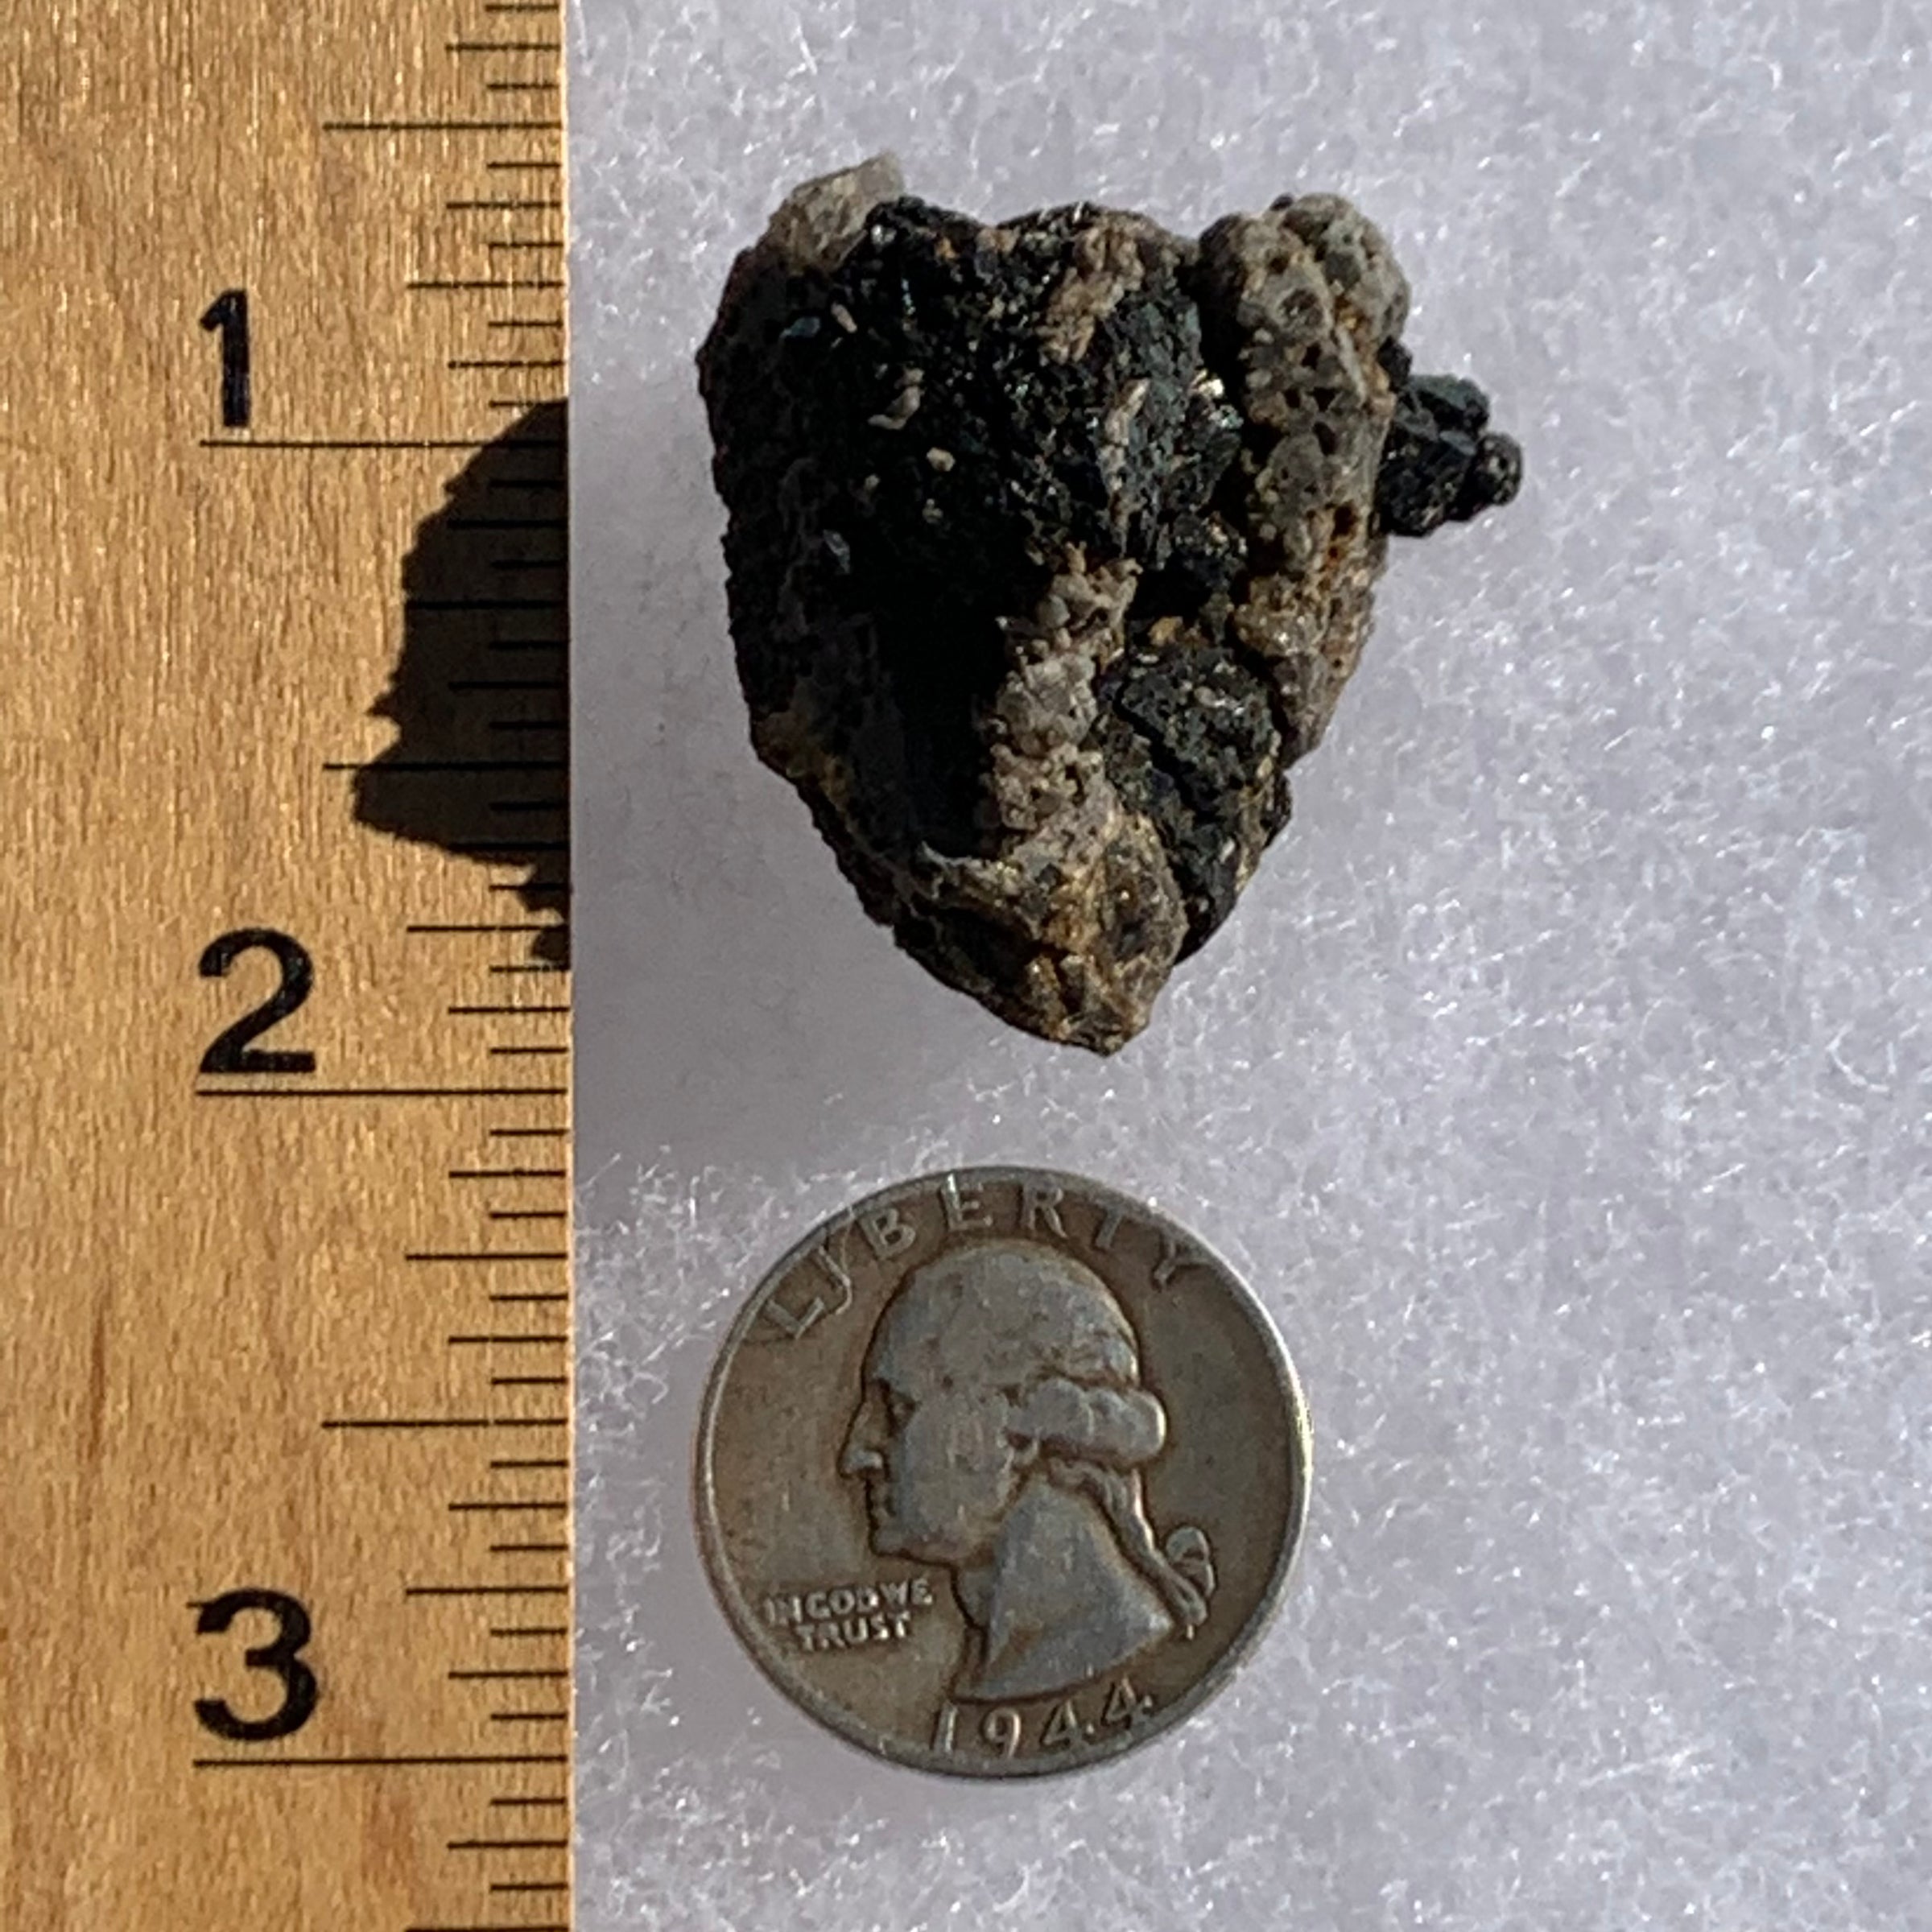 large brookite crystals on a smokey quartz cluster next to a ruler and a quarter for scale